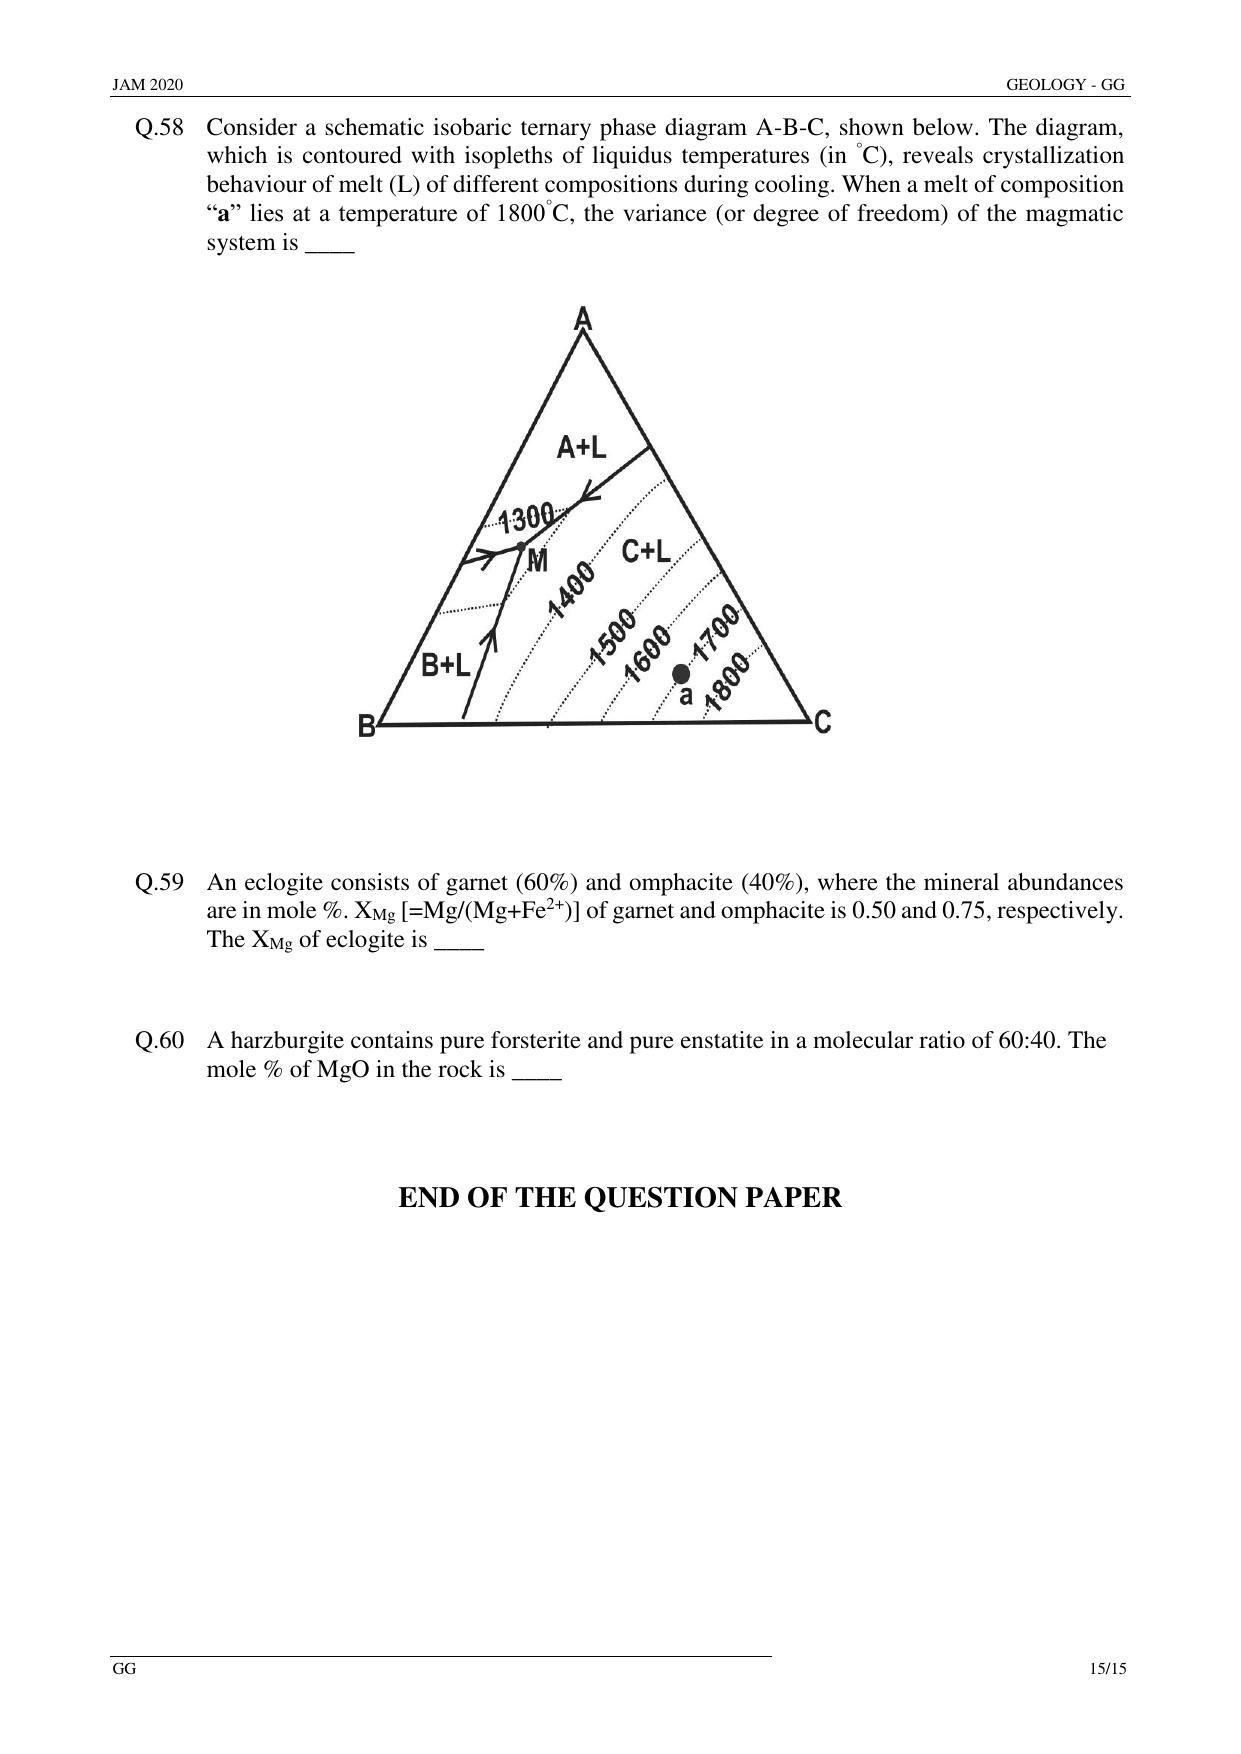 JAM 2020: GG Question Paper - Page 15